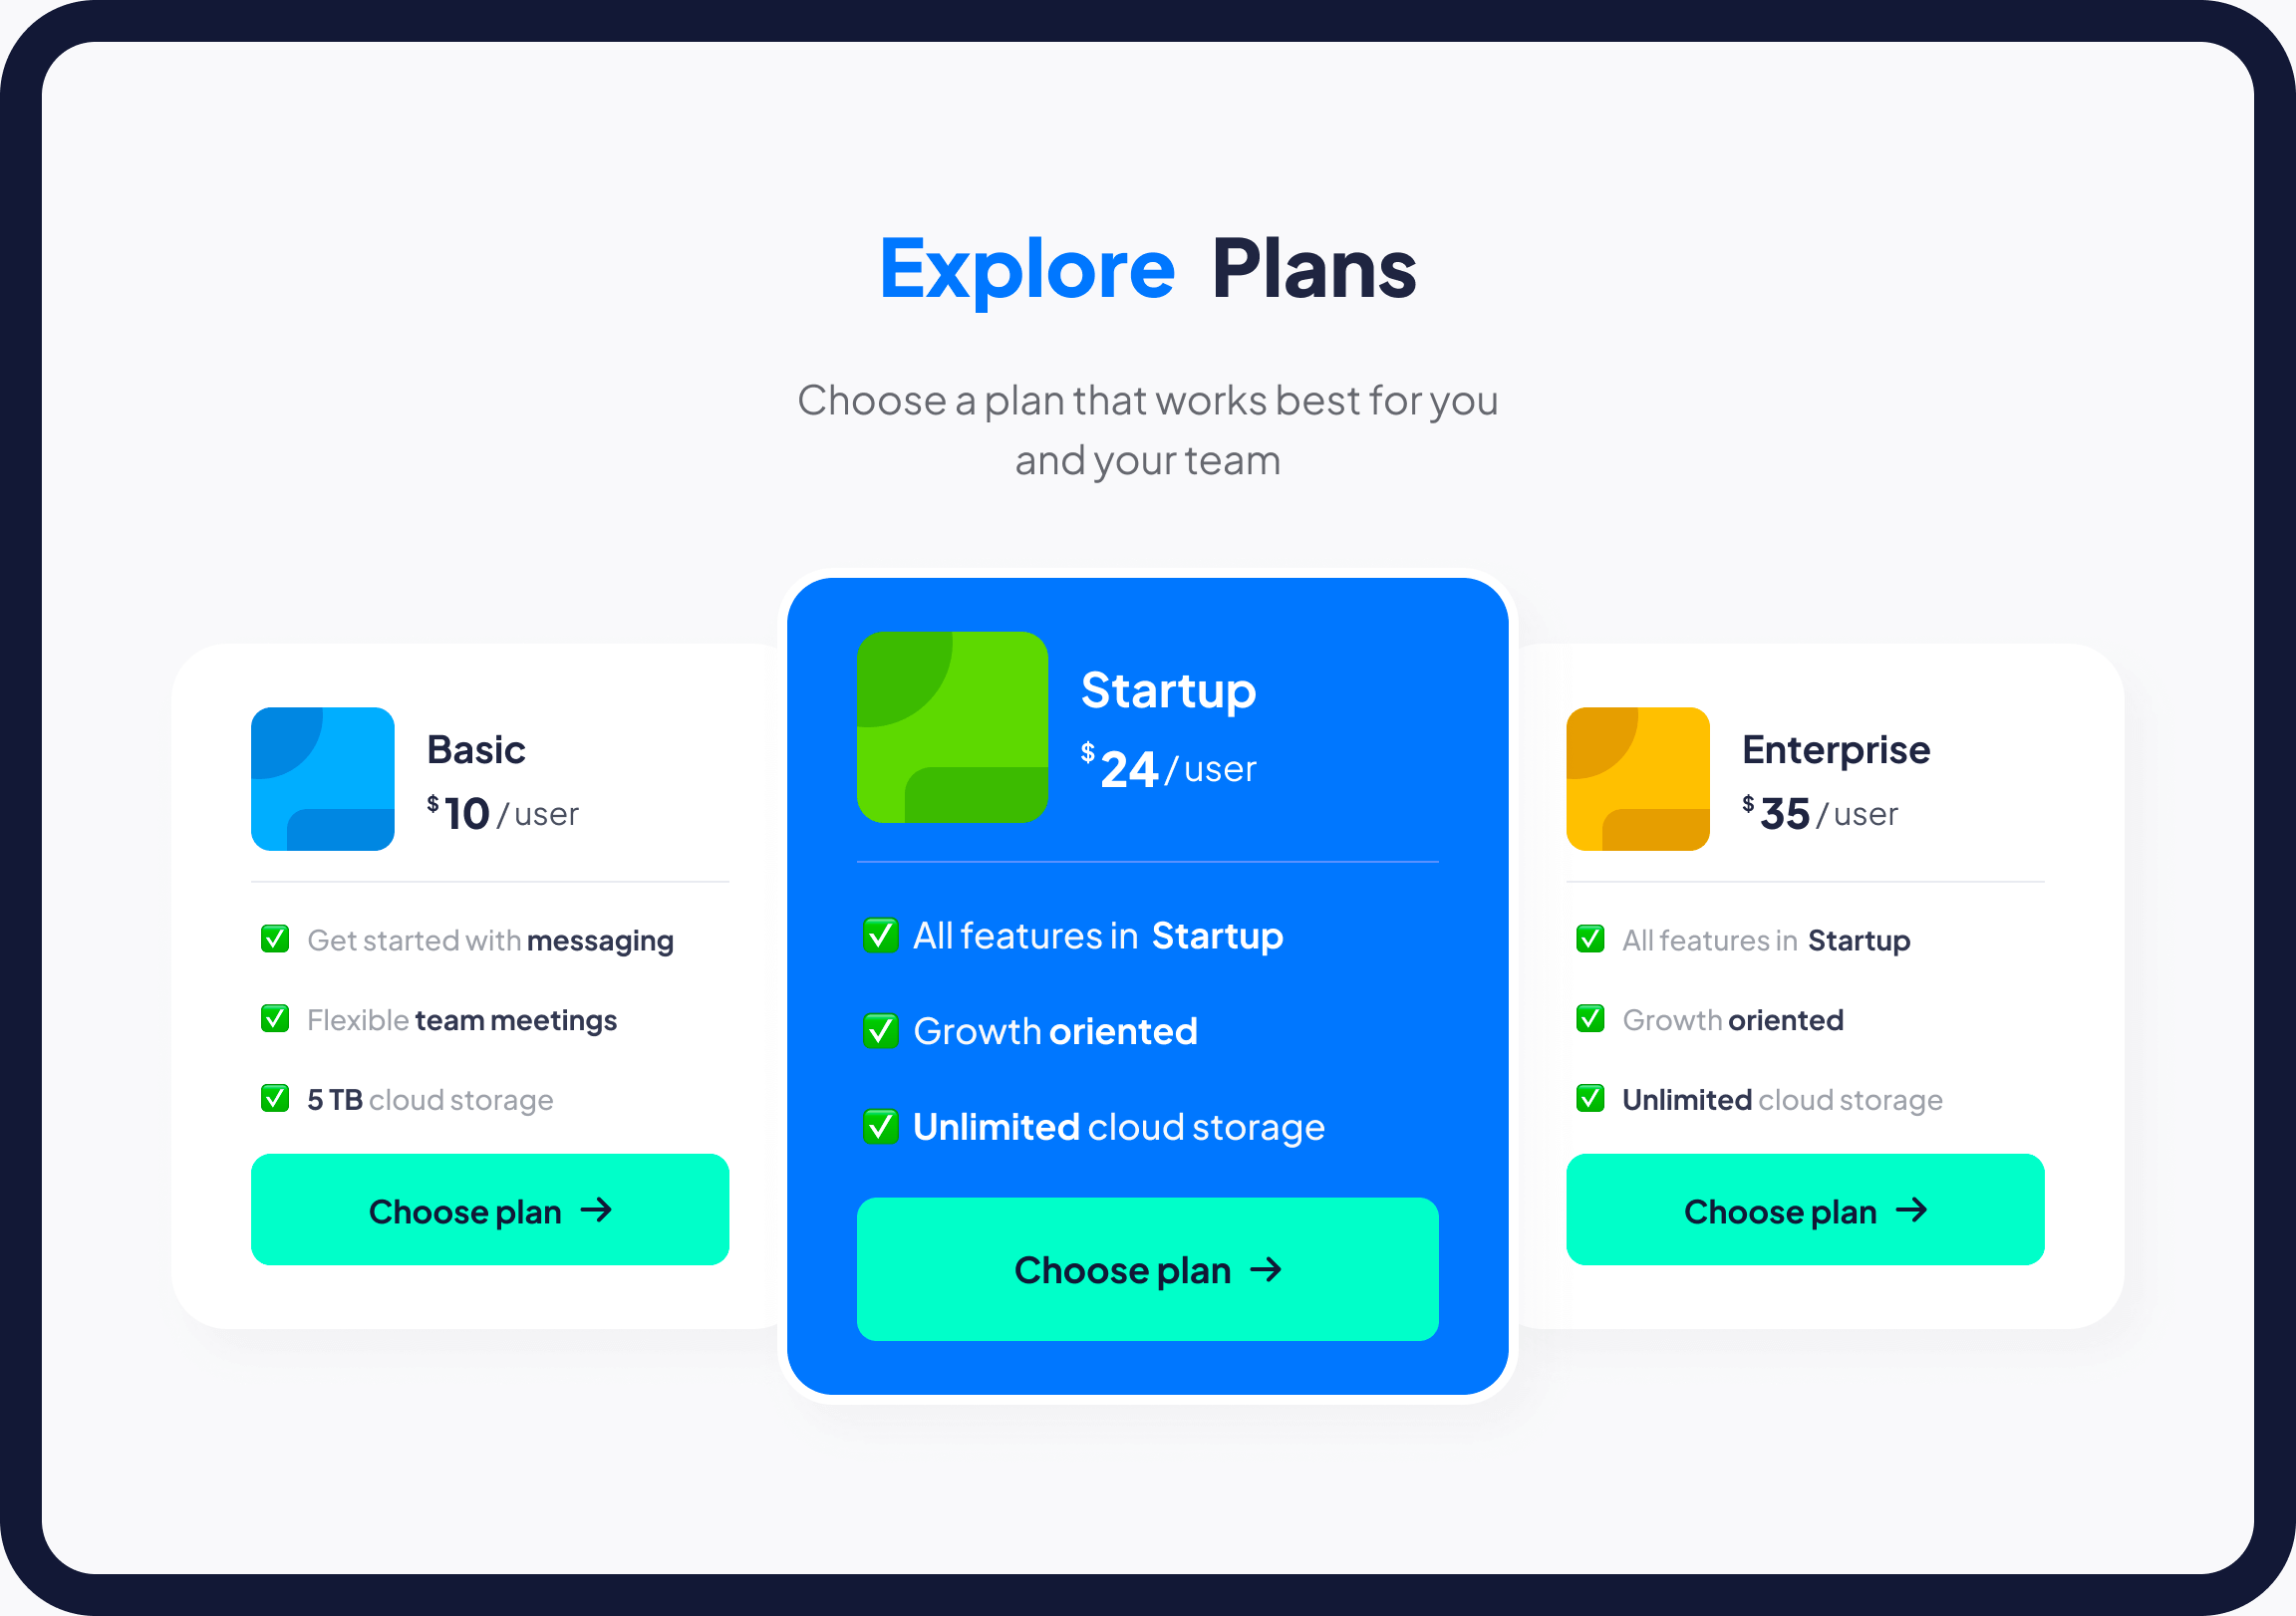 Image of subscription plans to choose from.